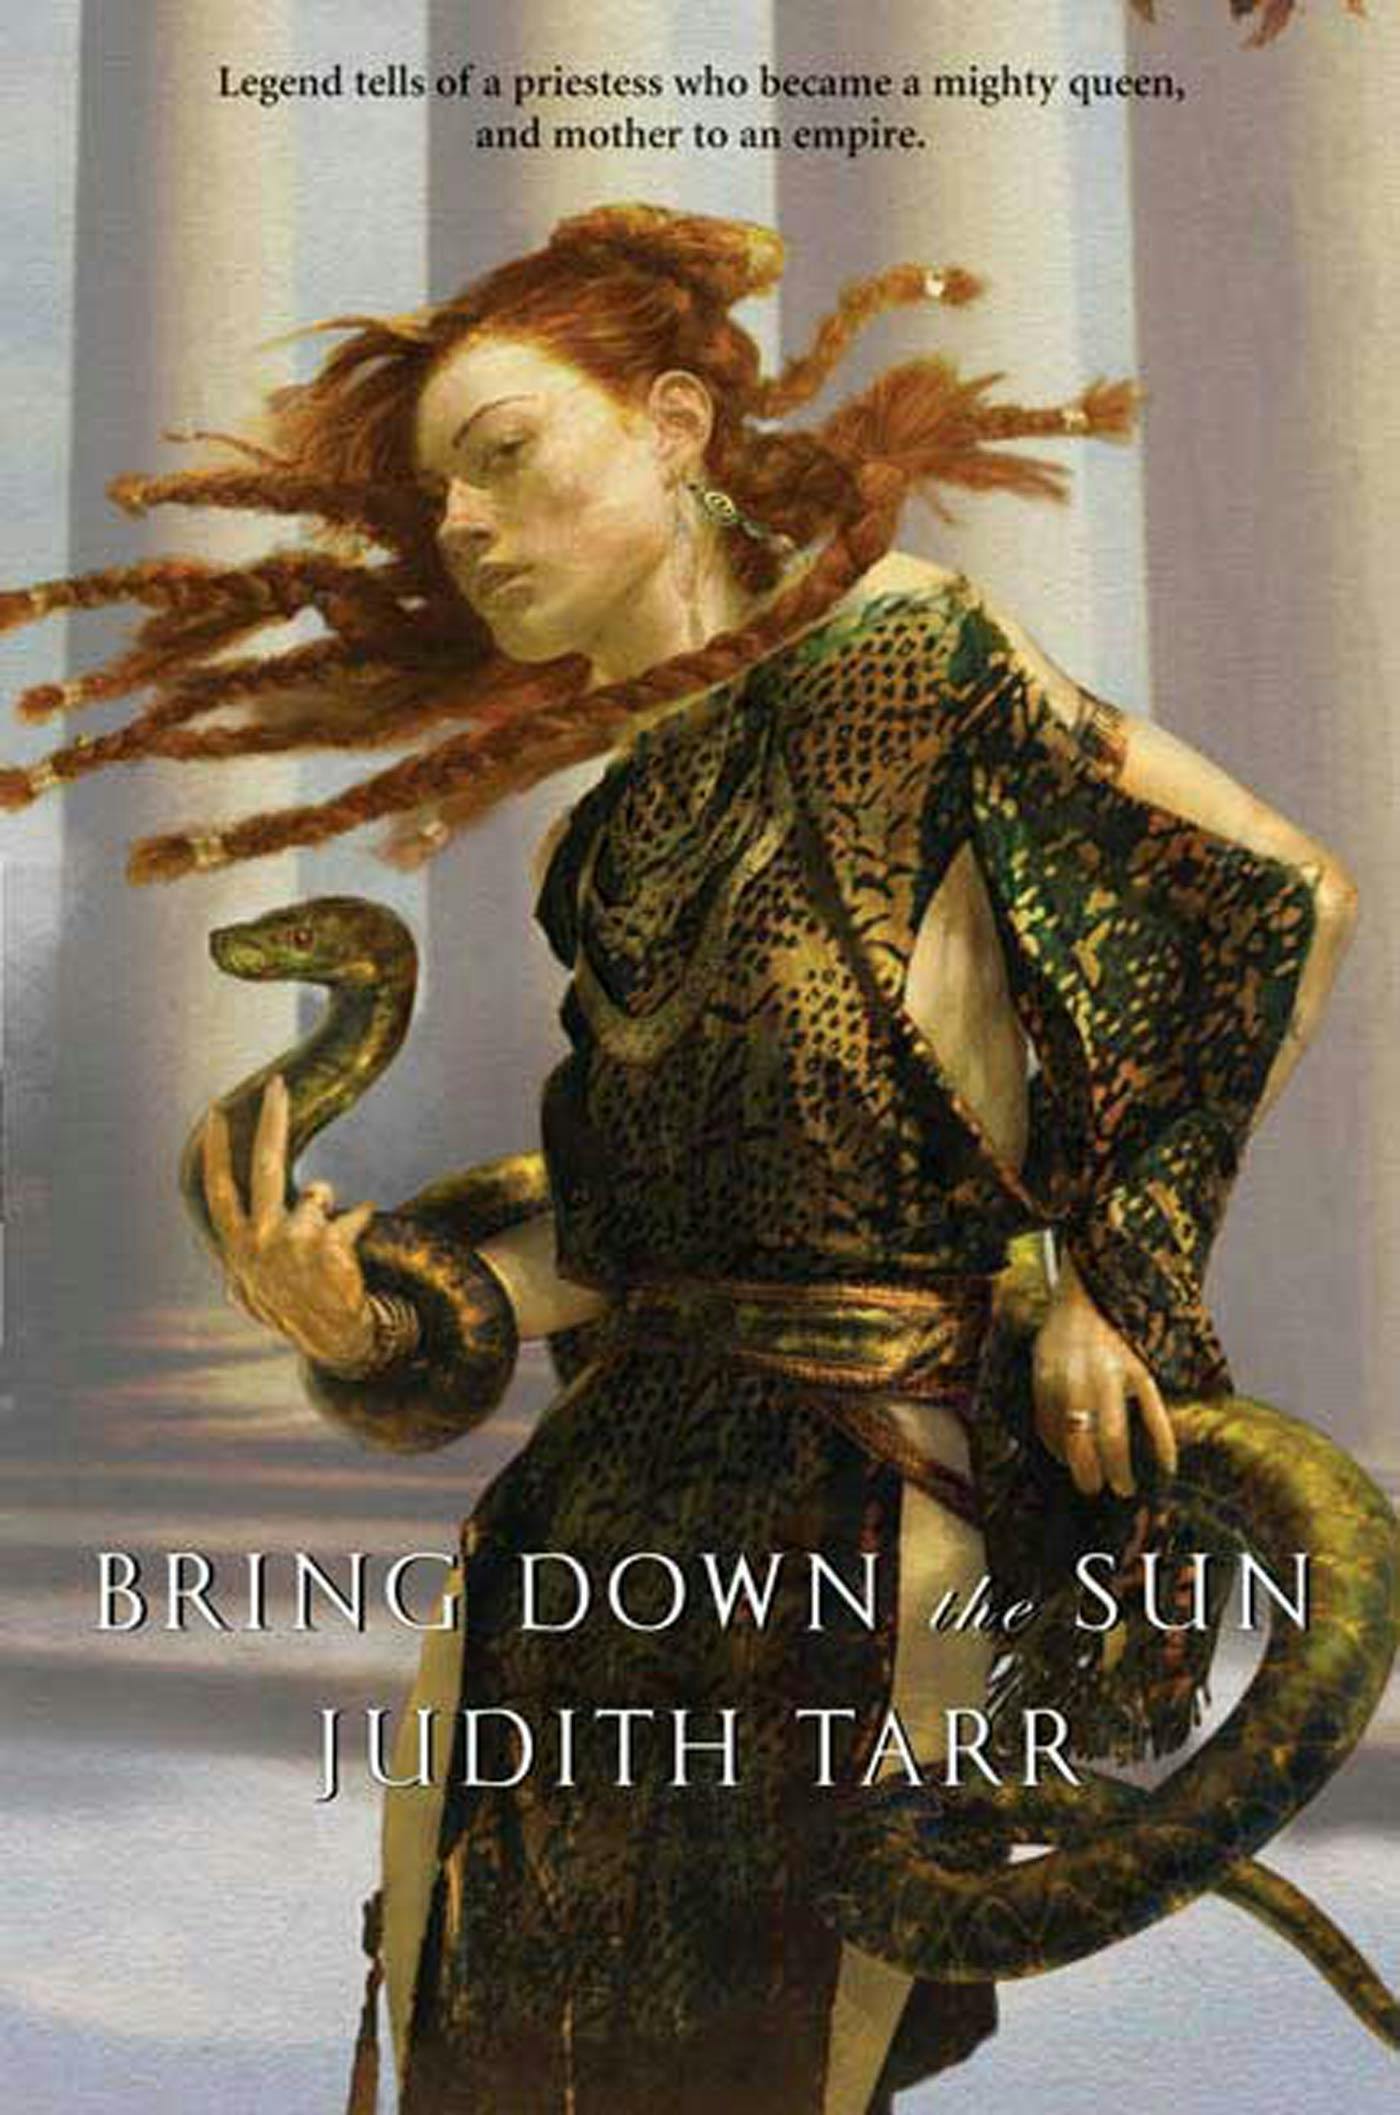 Cover for the book titled as: Bring Down the Sun